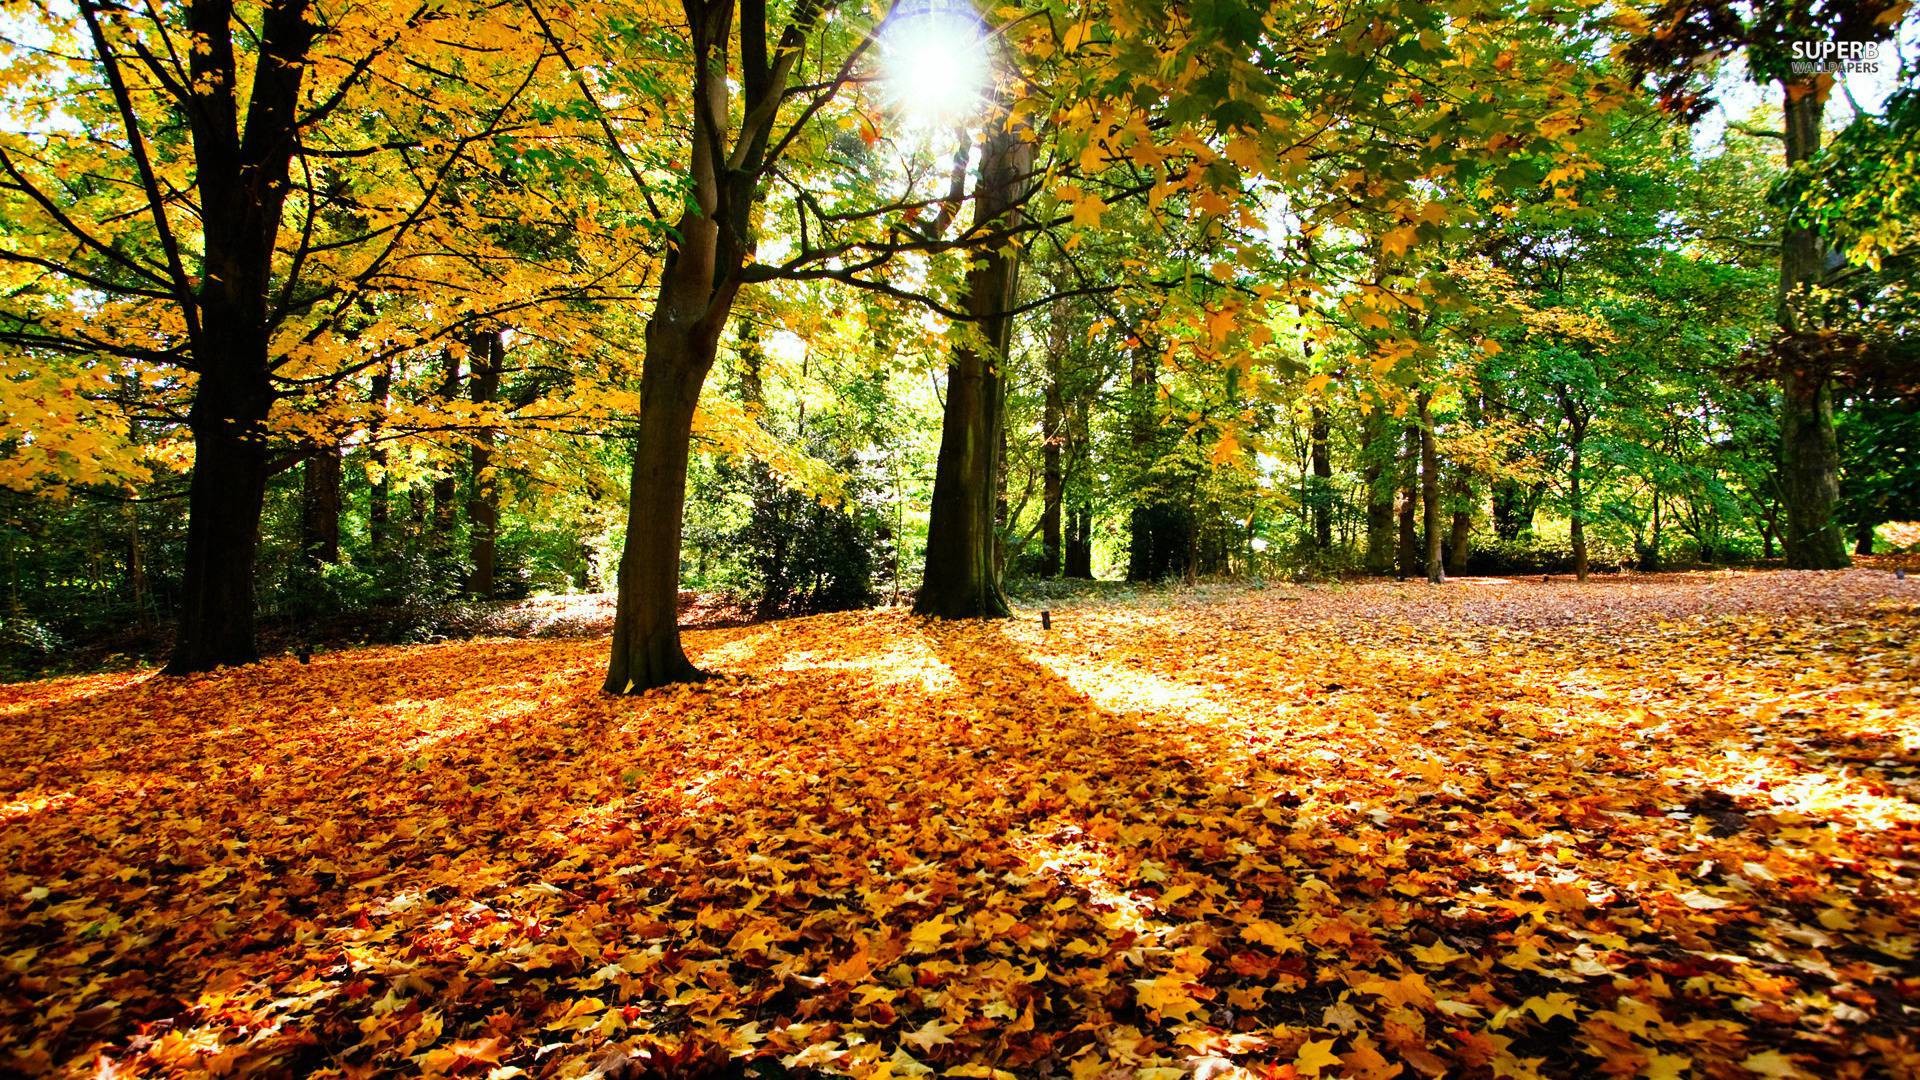 1920x1080 Autumn in the forest wallpaper - Nature wallpapers - #